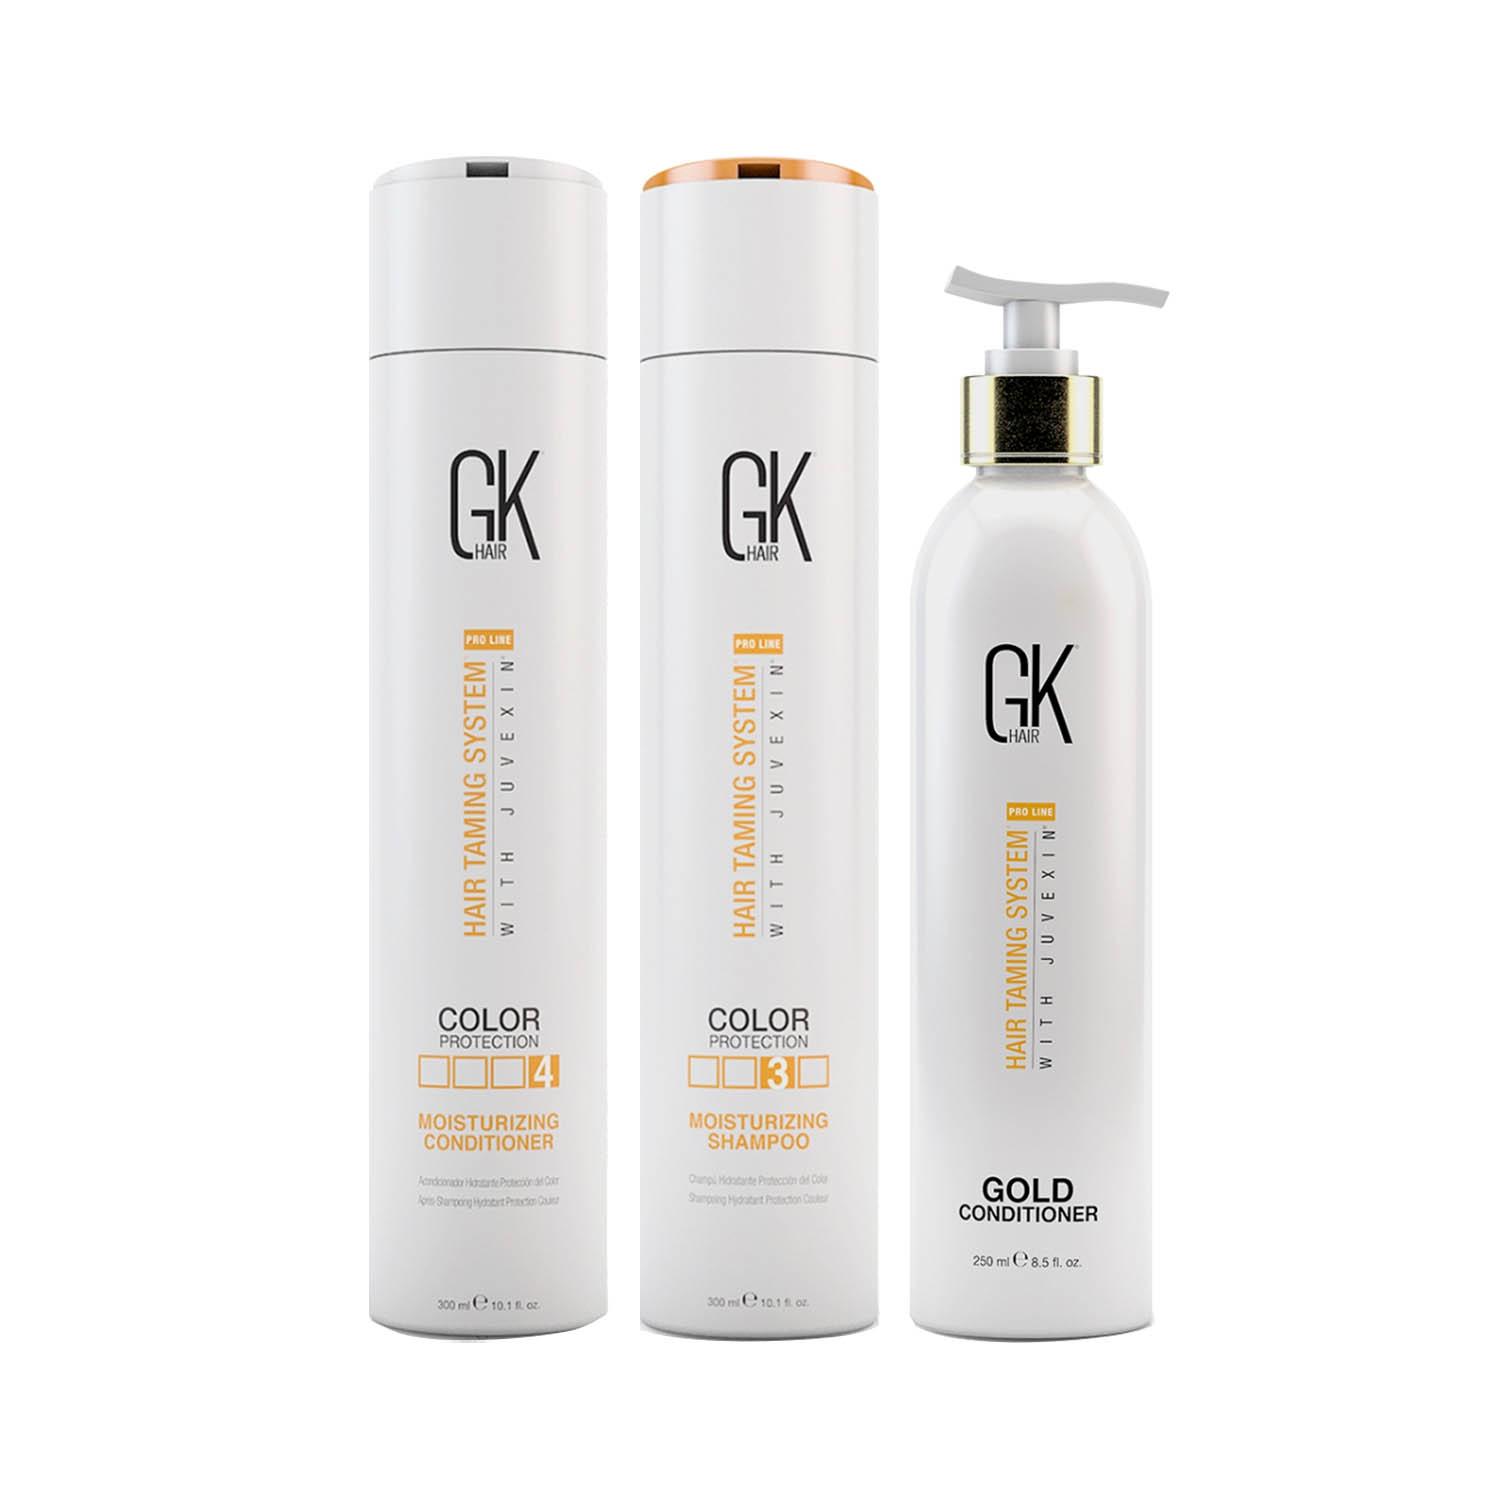 GK Hair Moisturizing Shampoo and Conditioner 300ml with Gold Condtioner 250ml